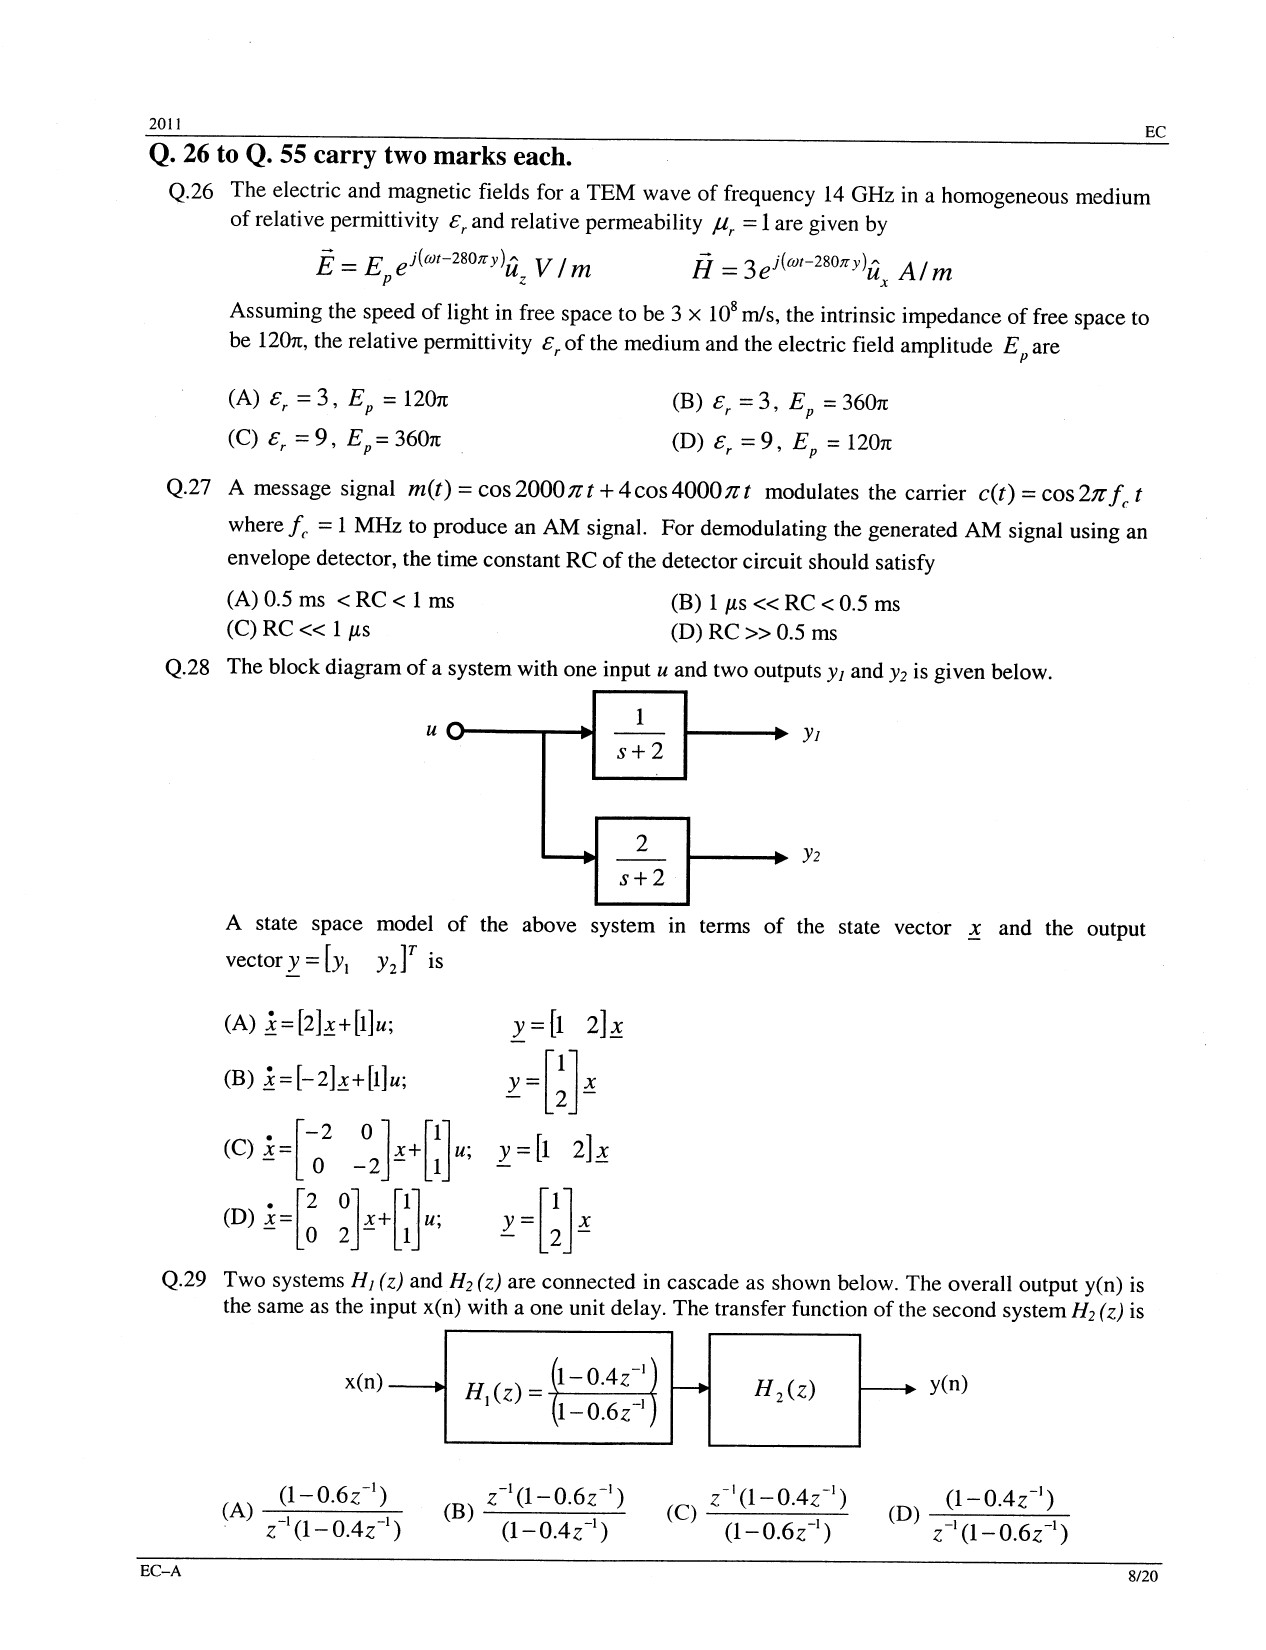 GATE Exam Question Paper 2011 Electronics and Communication Engineering 8